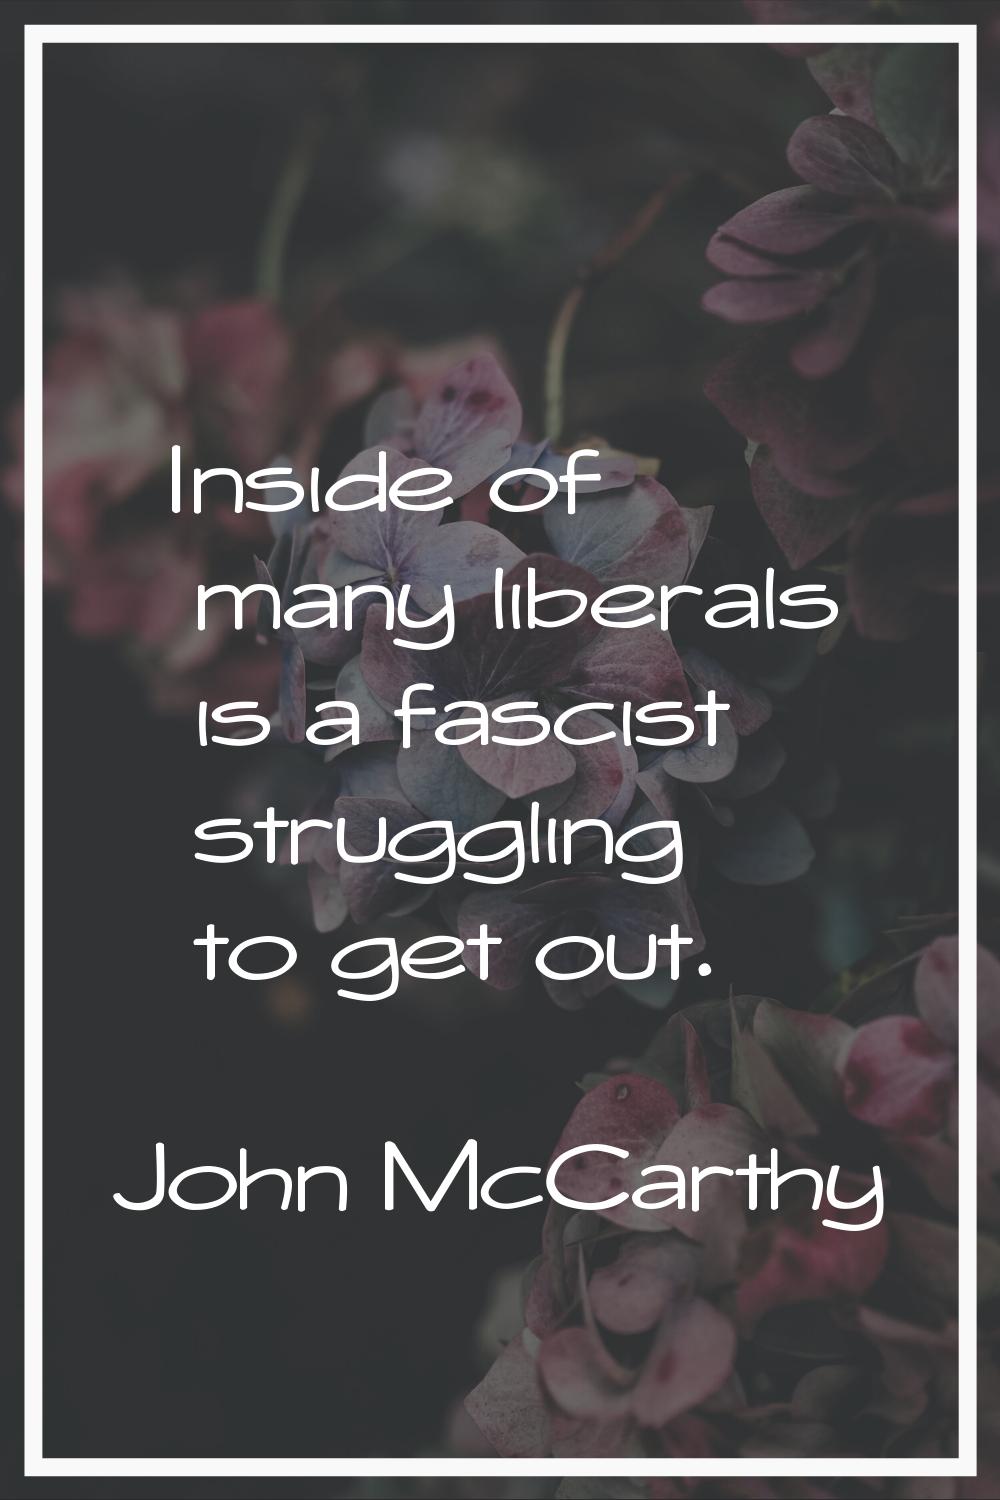 Inside of many liberals is a fascist struggling to get out.